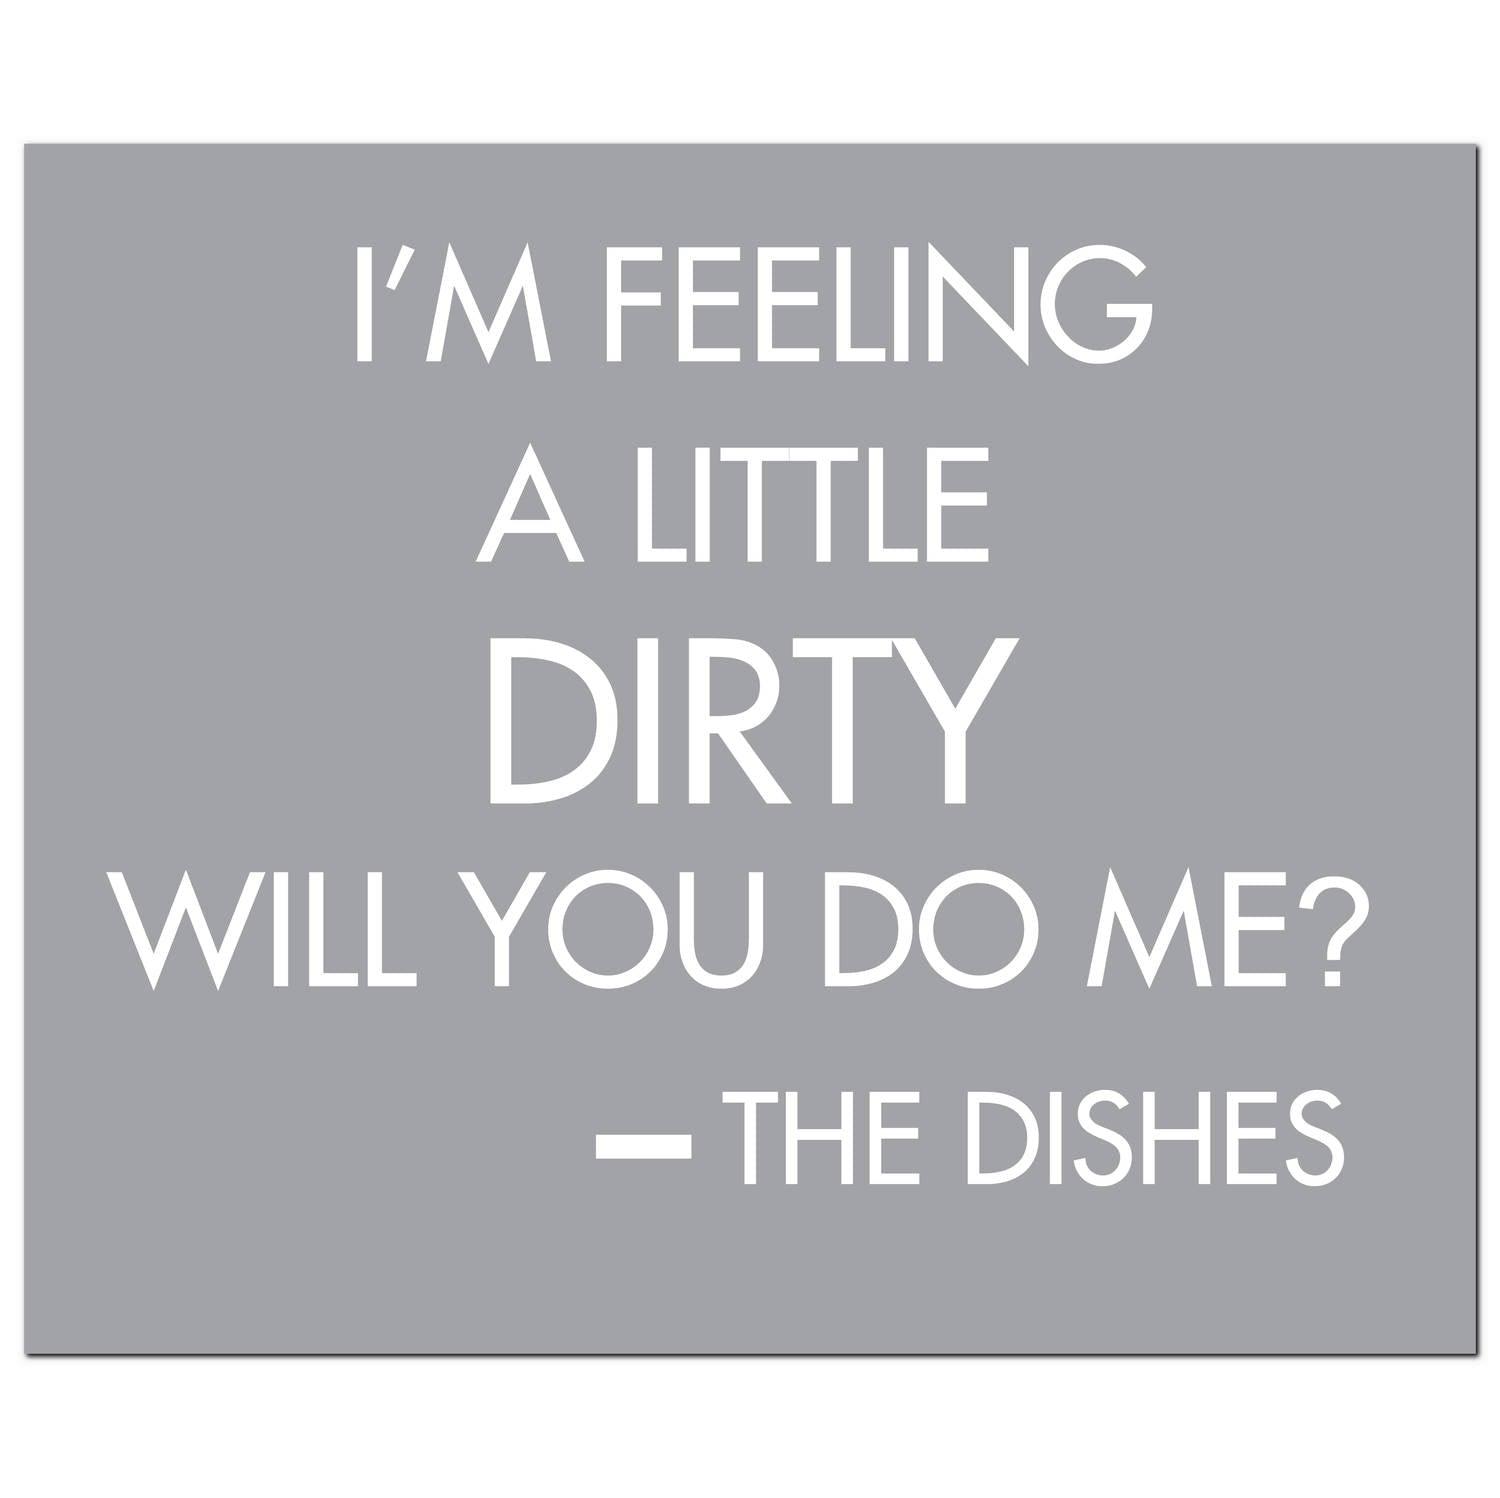 View IM Feeling A Little Dirty Will You Do Me Silver Foil Plaque information